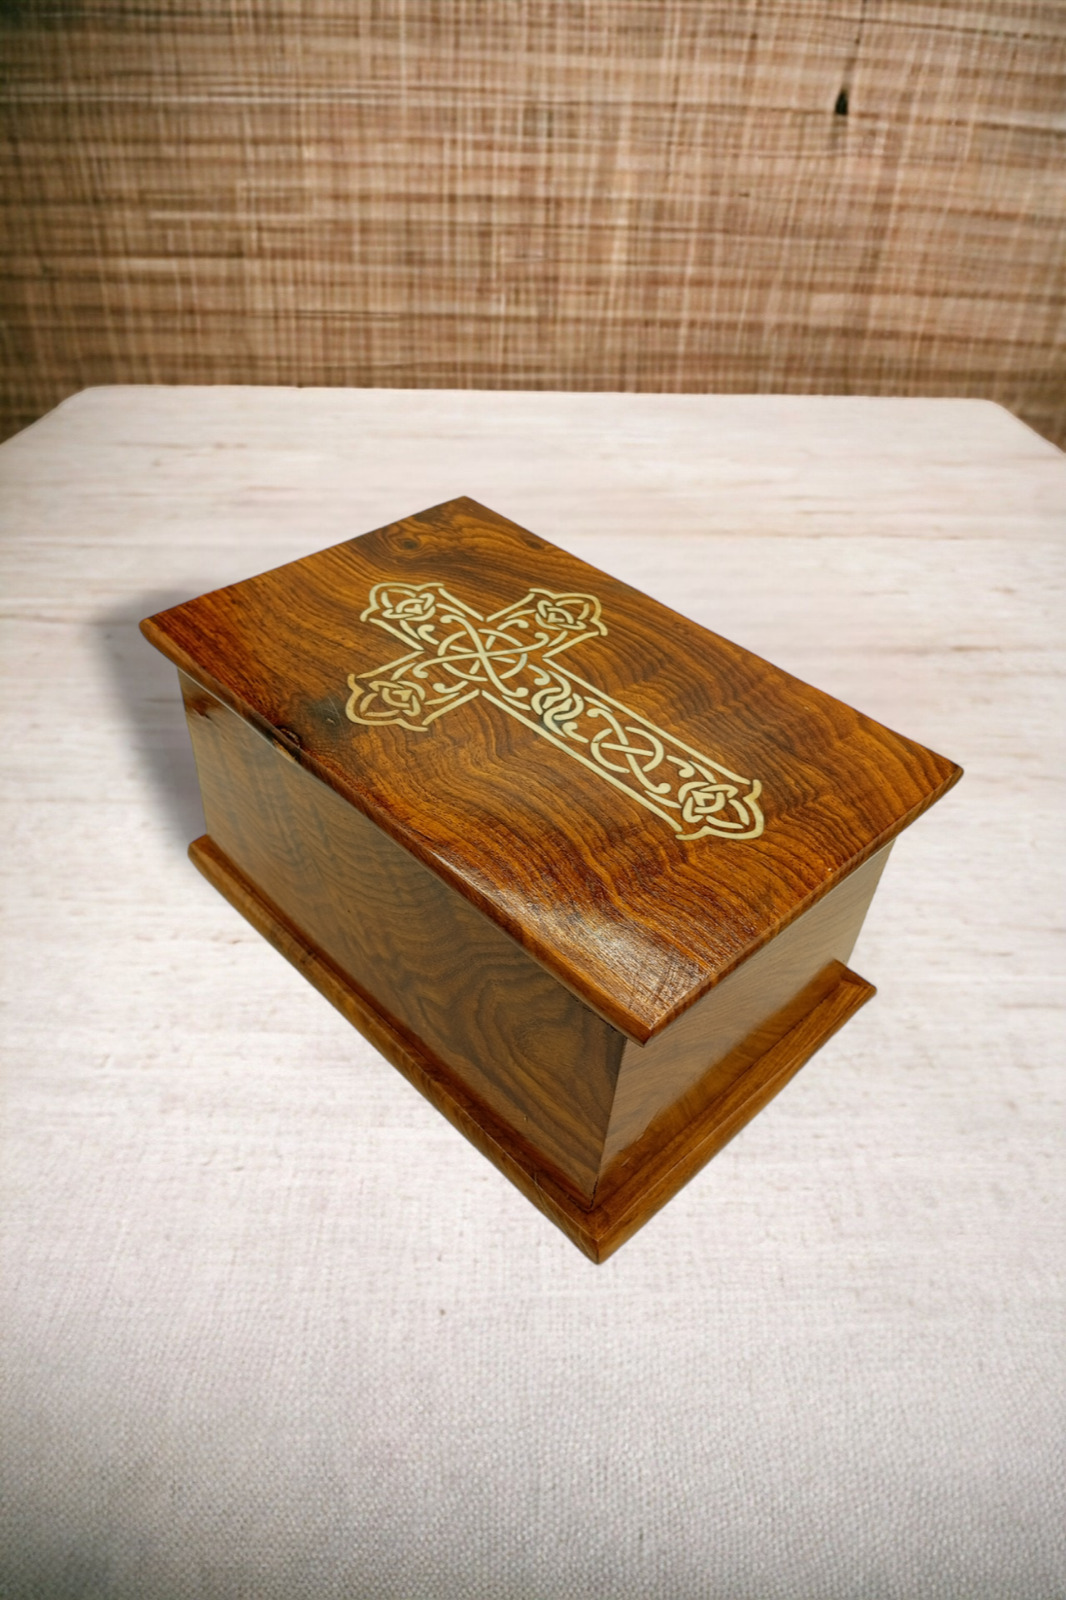 Wooden Urn for Human Ashes Beautiful Cross Engraved Design -Wooden Urns